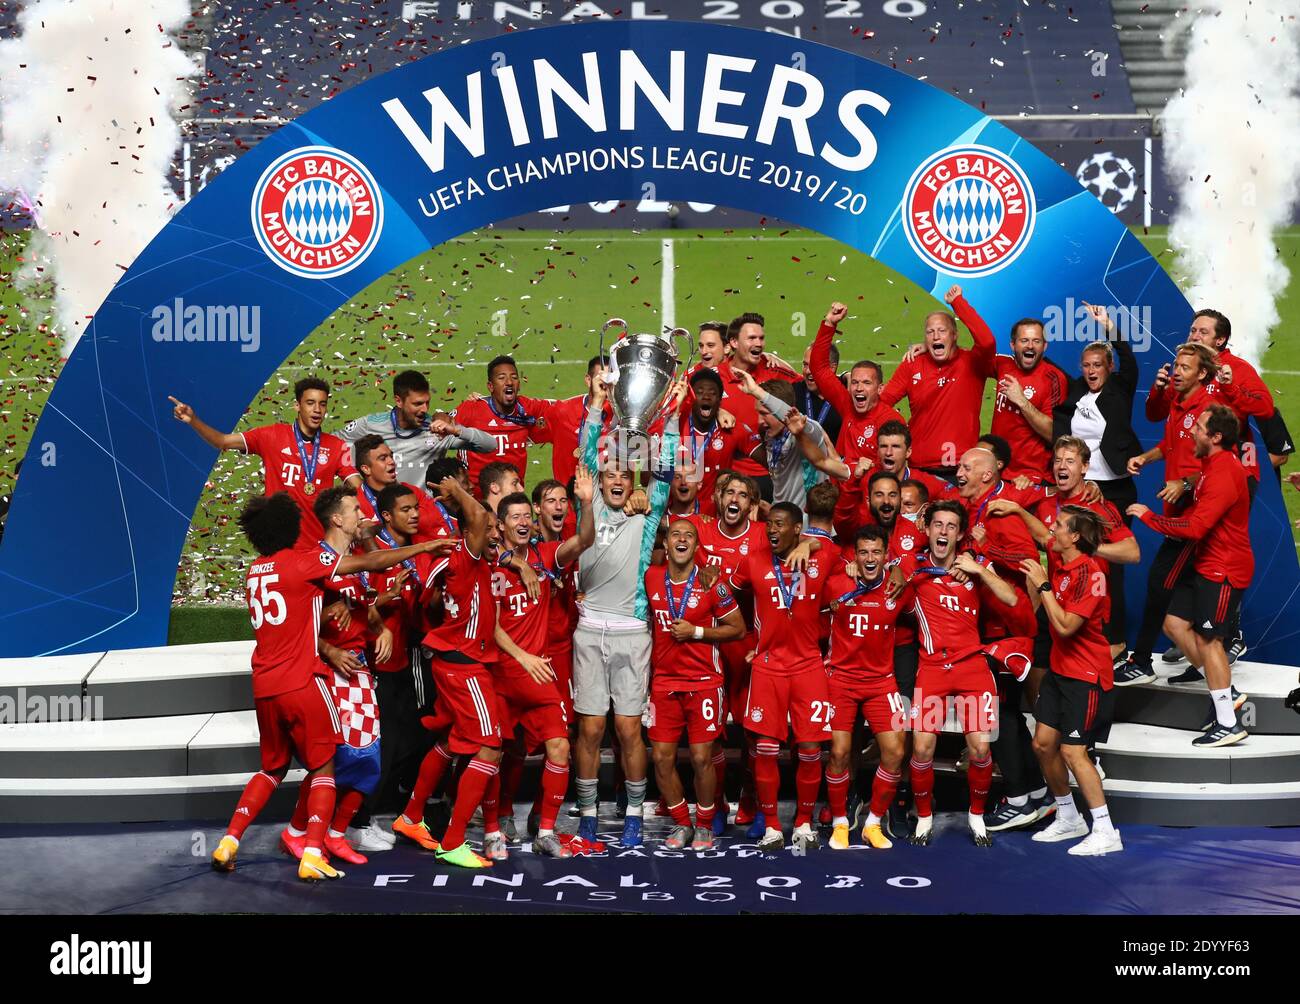 (201228) -- BEIJING, Dec. 28, 2020 (Xinhua) -- Manuel Neuer (C, front), captain of FC Bayern Munich lifts the UEFA Champions League Trophy following his team's victory in the UEFA Champions League Final match between Paris Saint-Germain and Bayern Munich at Estadio do Sport Lisboa e Benfica in Lisbon, Portugal, Aug. 23, 2020. On June 25, Liverpool secured the Premier League title with seven games remaining, ending a 30-year league title drought. On August 23, Bayern Munich was crowned the 2019/2020 UEFA Champions League winners after defeating Paris Saint-Germain in the final, finishing the Eu Stock Photo